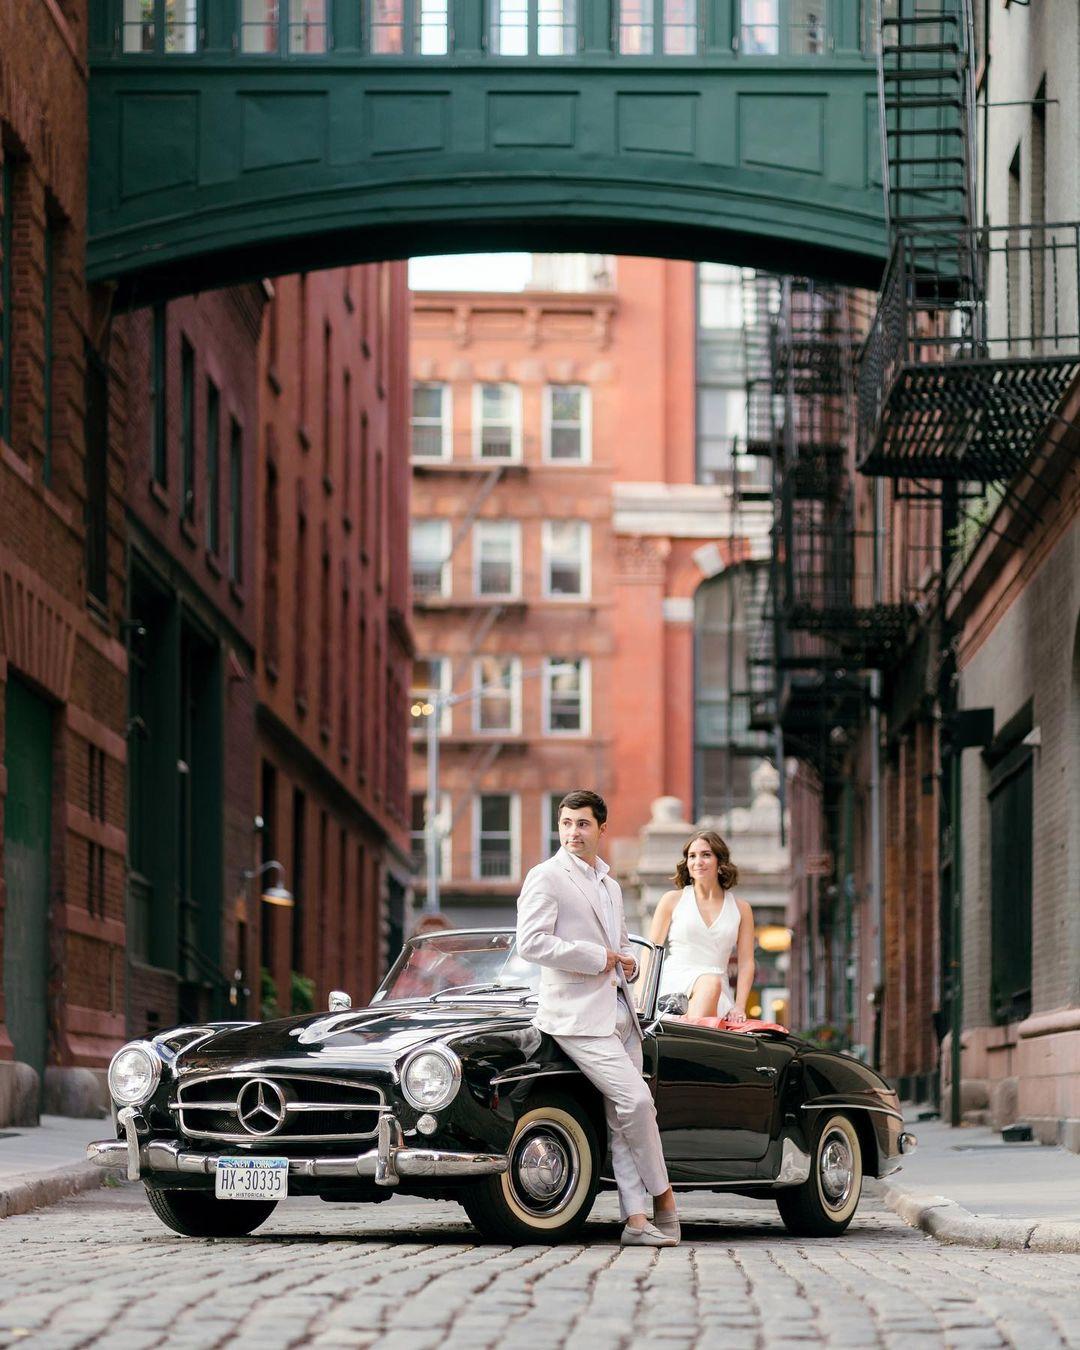 class="content__text"
 Stylish engagement session with @laurenkurre and @nickrudz in NYC 📸

Which photo is your favorite? ❤️

 #nycengagement #tribecaengagement #tribecawedding #tribecaskybridge #staplestreetskybridge #nycskybridge #nycweddingphotographer #mersedessl190 #tribecaphotographer 
 